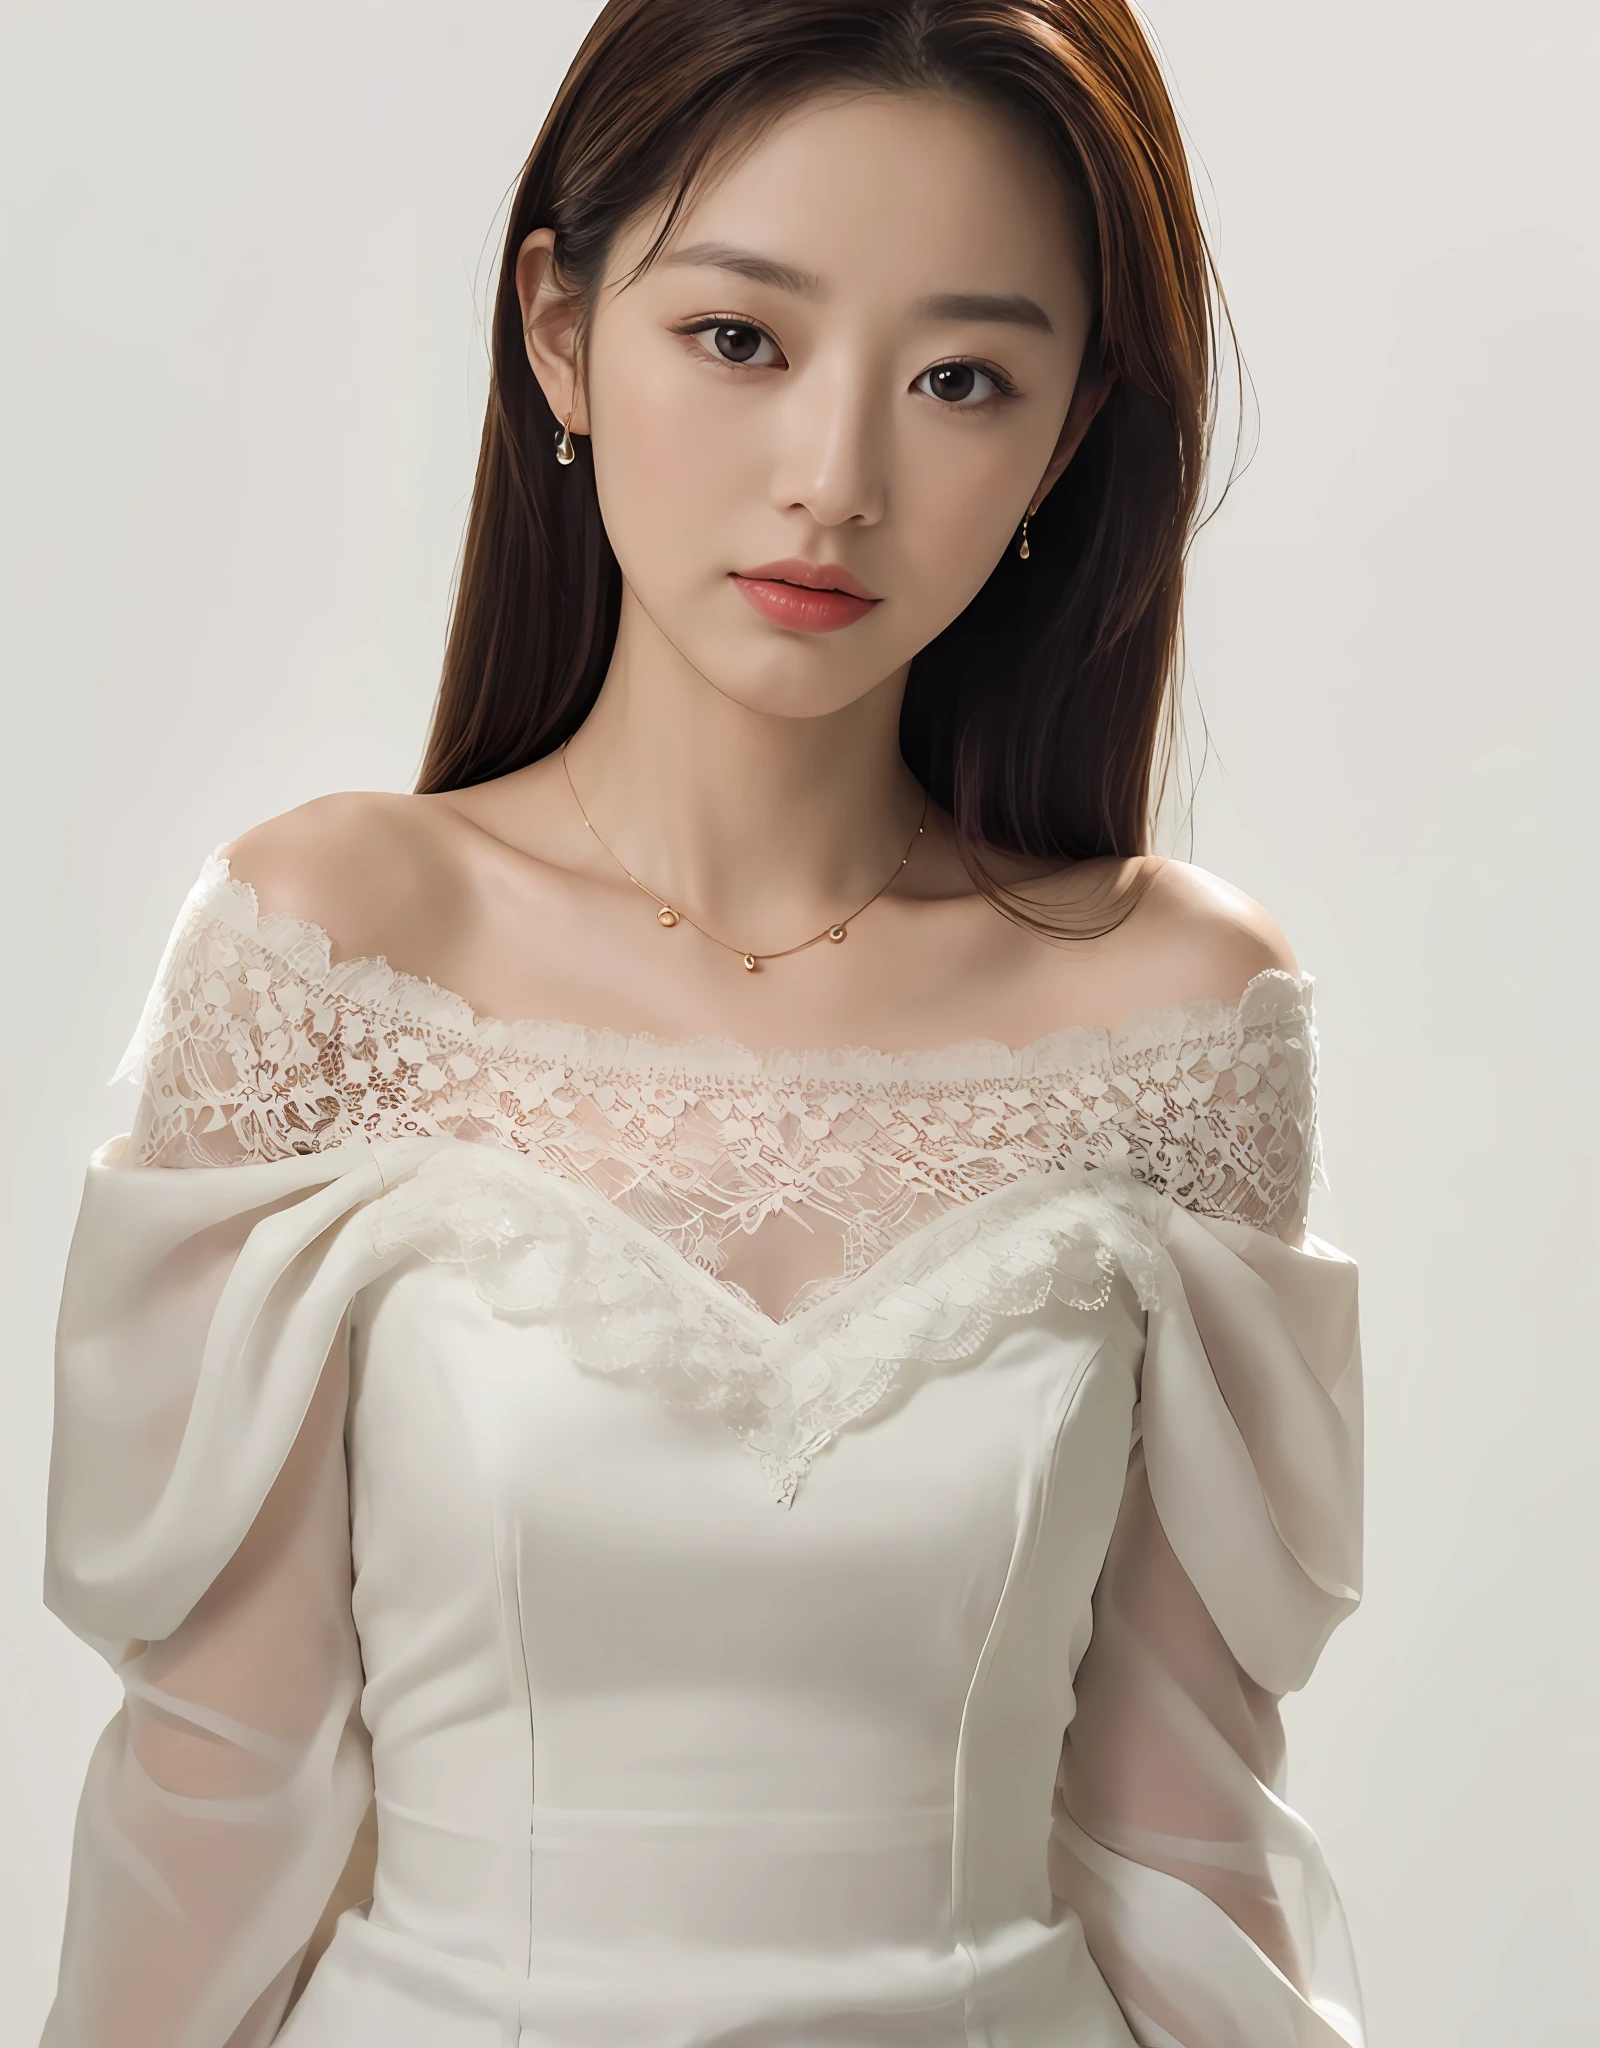 8K, Masterpiece, Best quality, Realistic,Attractive female necklace with lace necklace, Off-the-shoulder white shirt, Against a neutral background